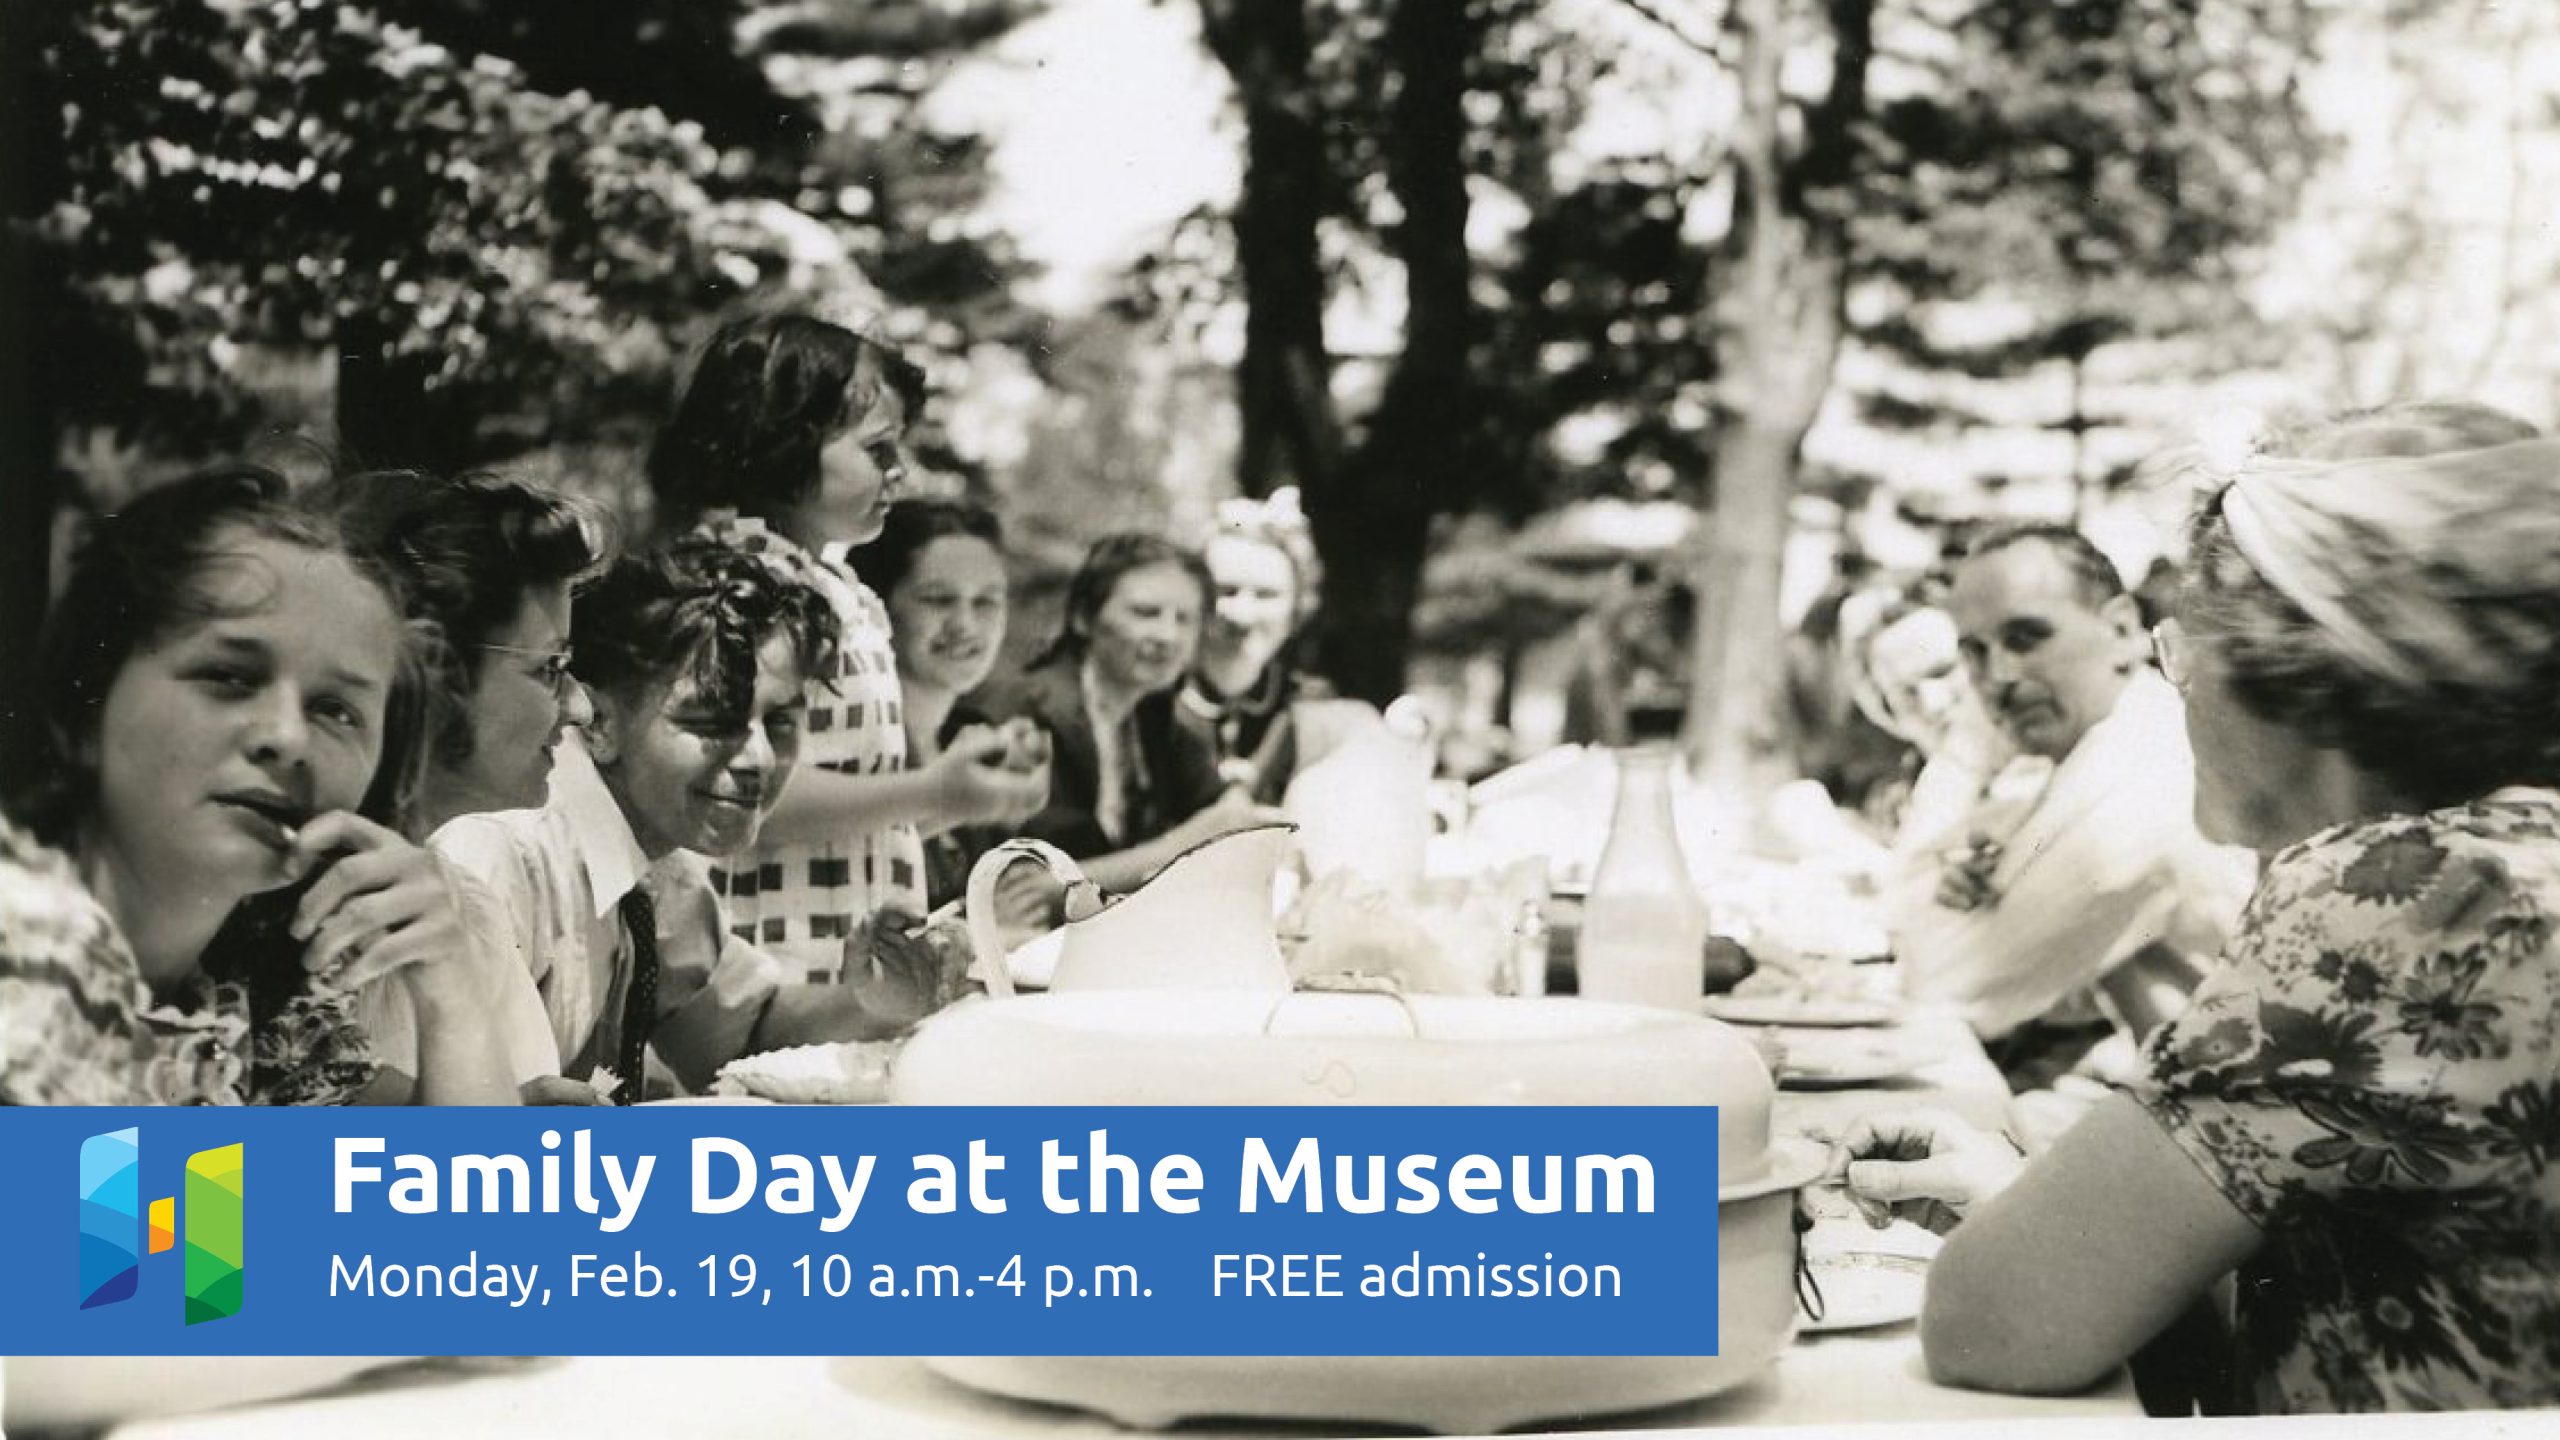 Historic image of a family sitting down to dinner outdoors. Text promotes Family Day at the Museum